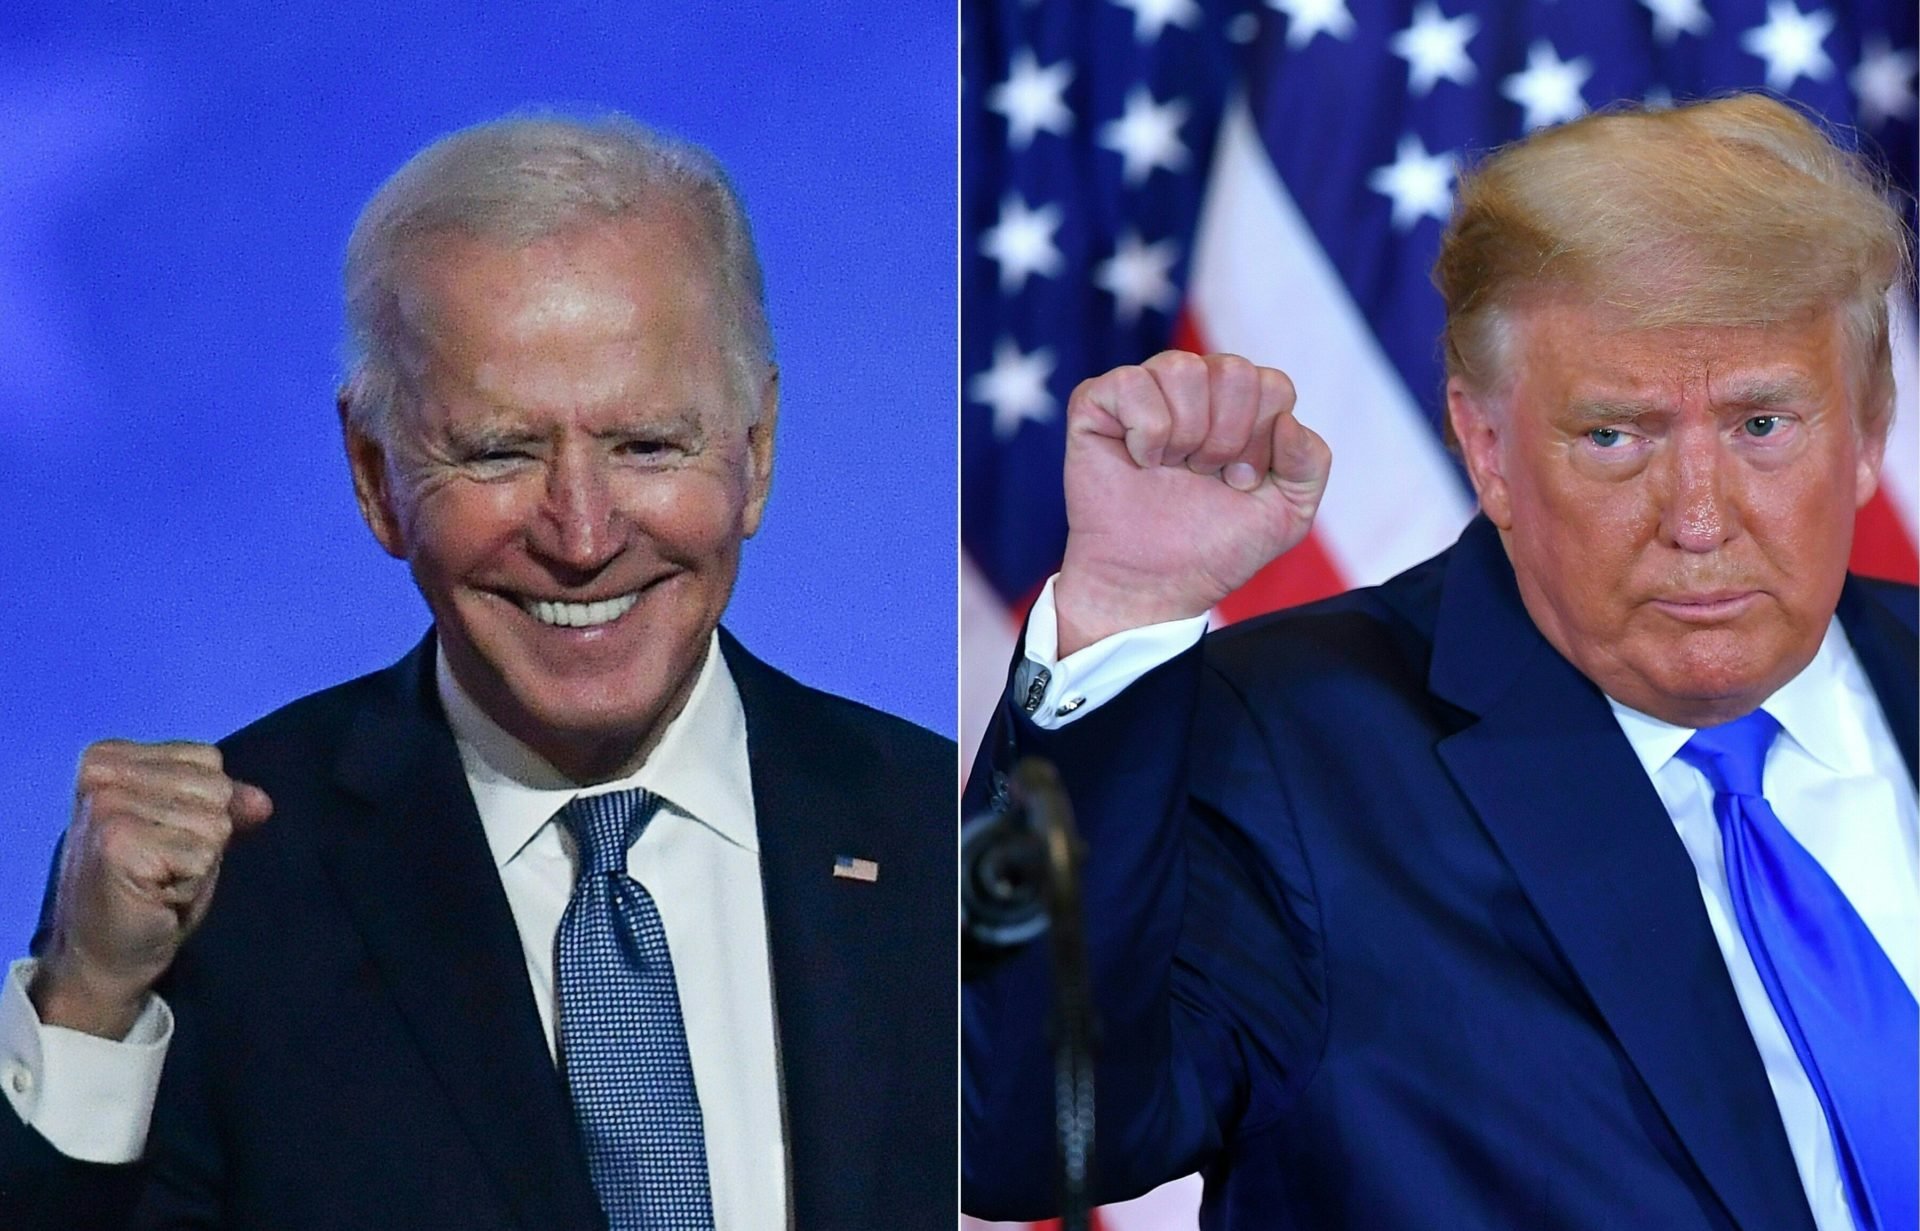 How does Trump’s health compare to Biden’s? Physical finds POTUS ‘vigorous’